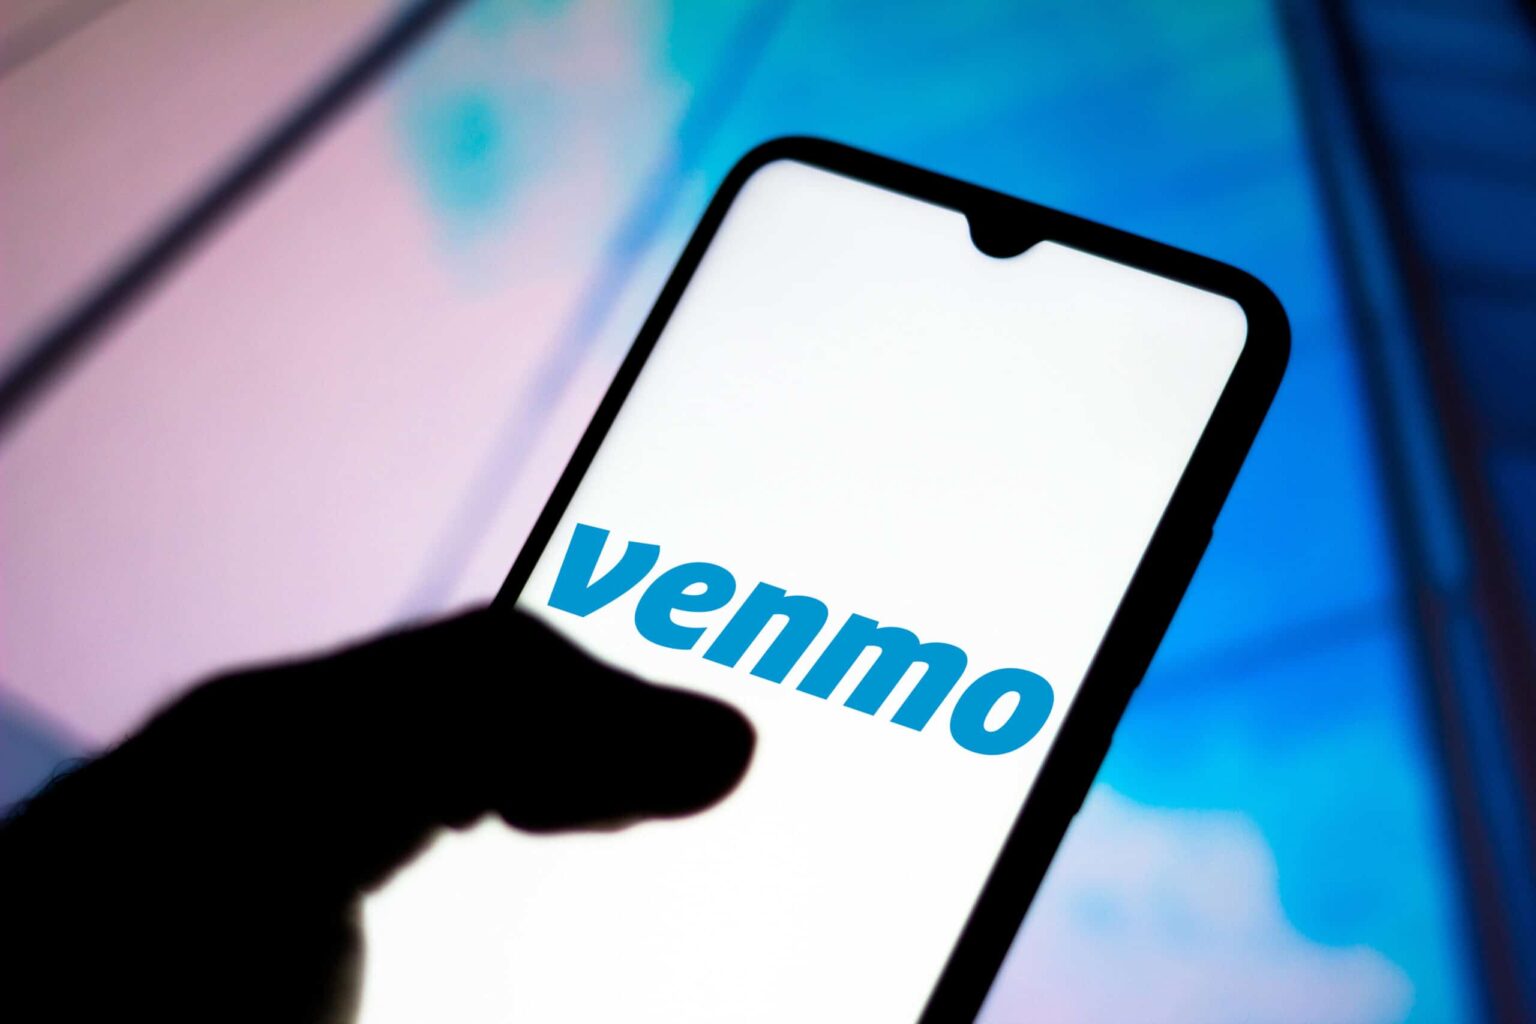 Experiencing 'Venmo instant transfer not working'? Discover common causes, troubleshooting tips, and how to contact Venmo for seamless transactions.